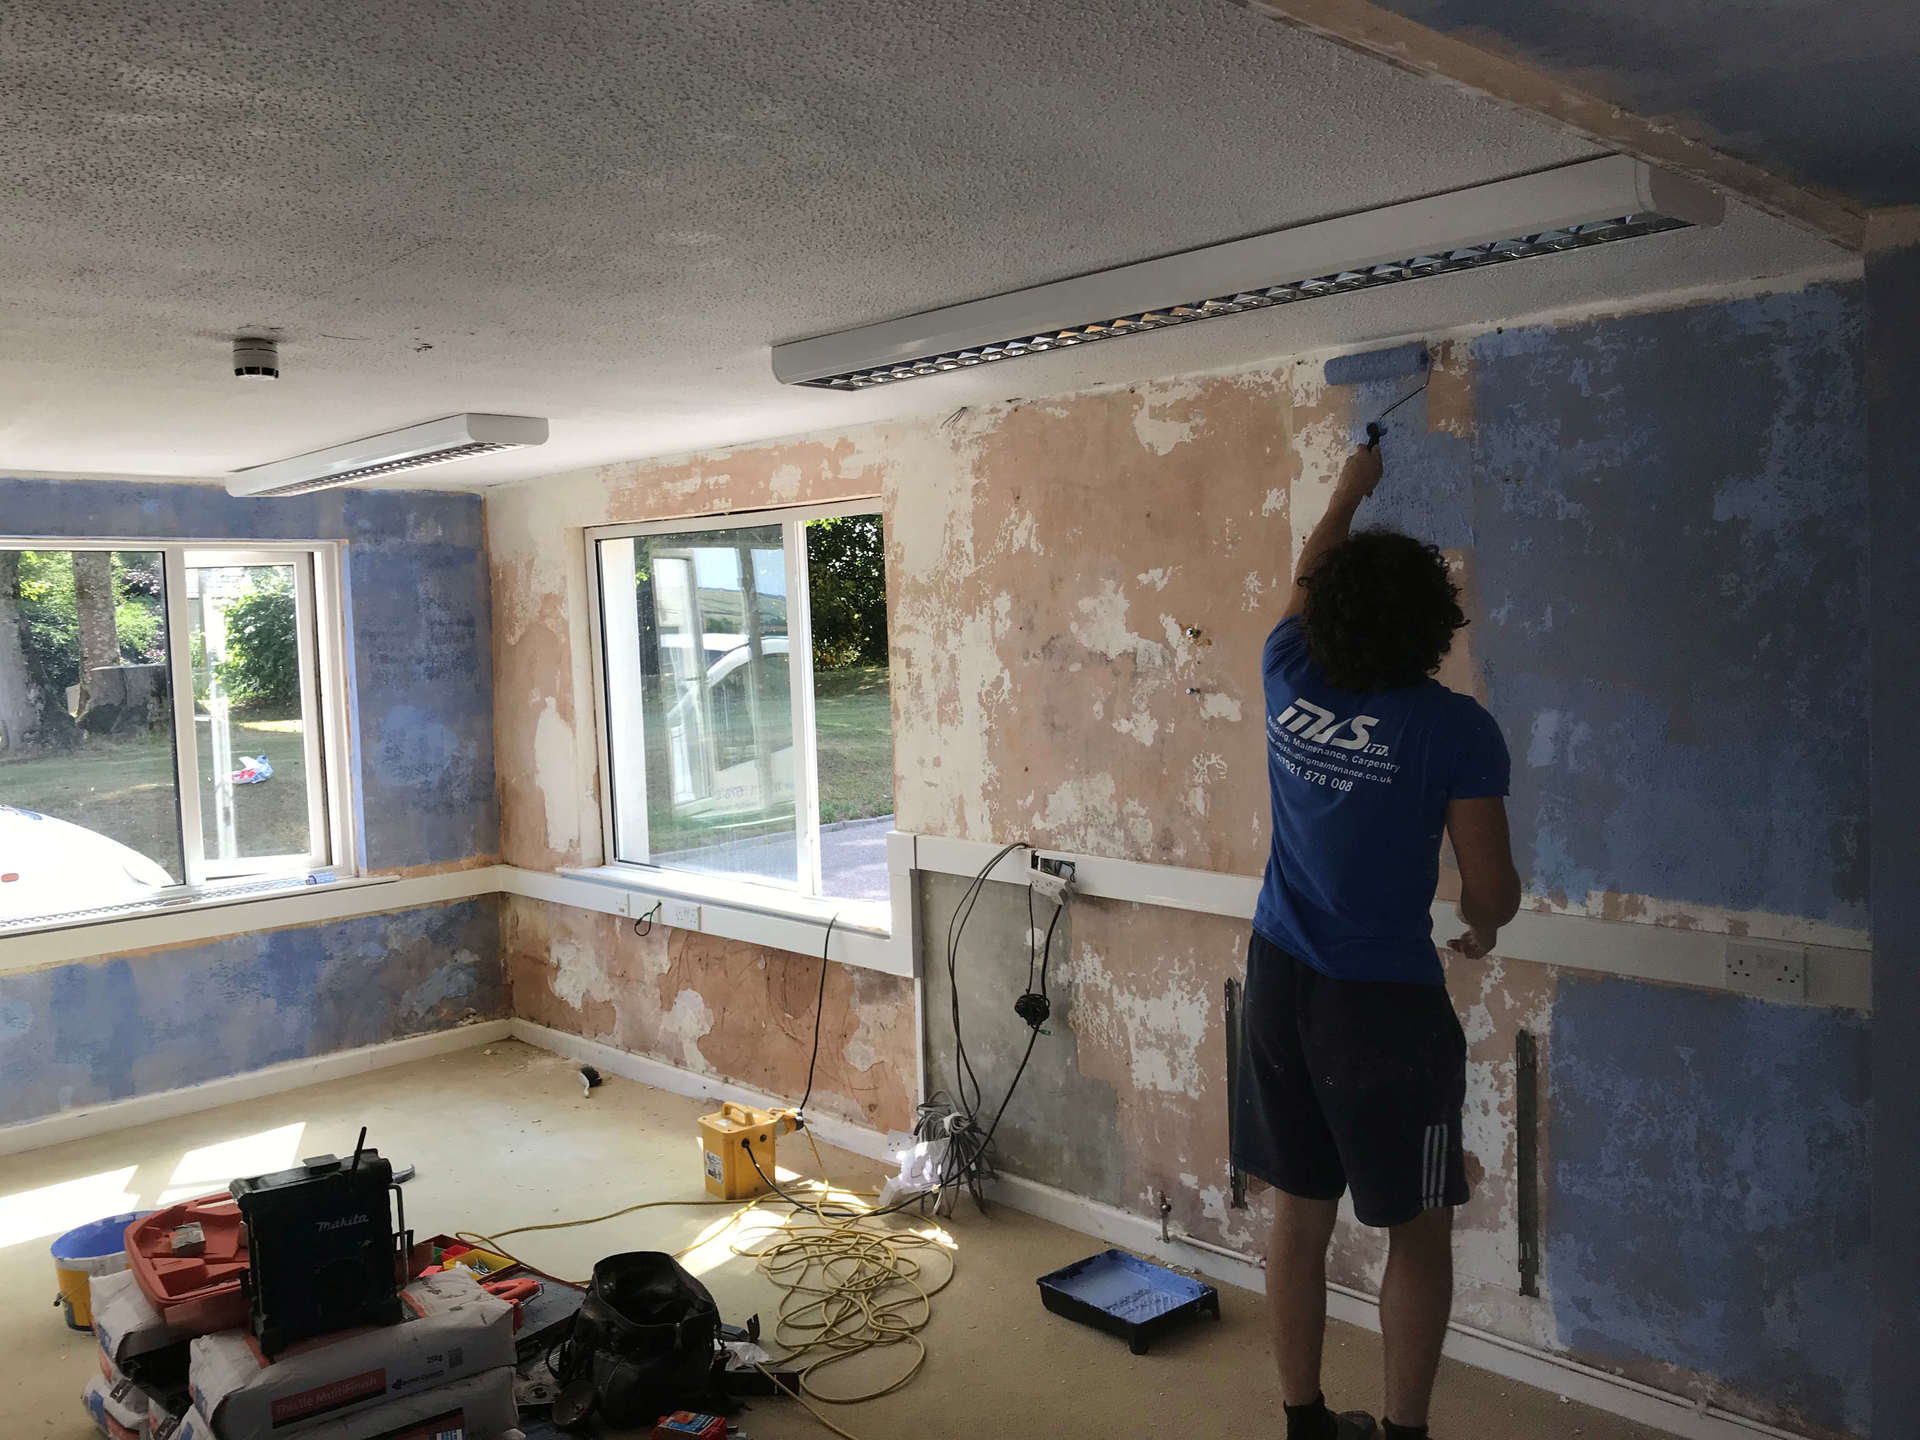 Refurbishment of classroom during summer holidays, walls stripped down to existing plaster. 